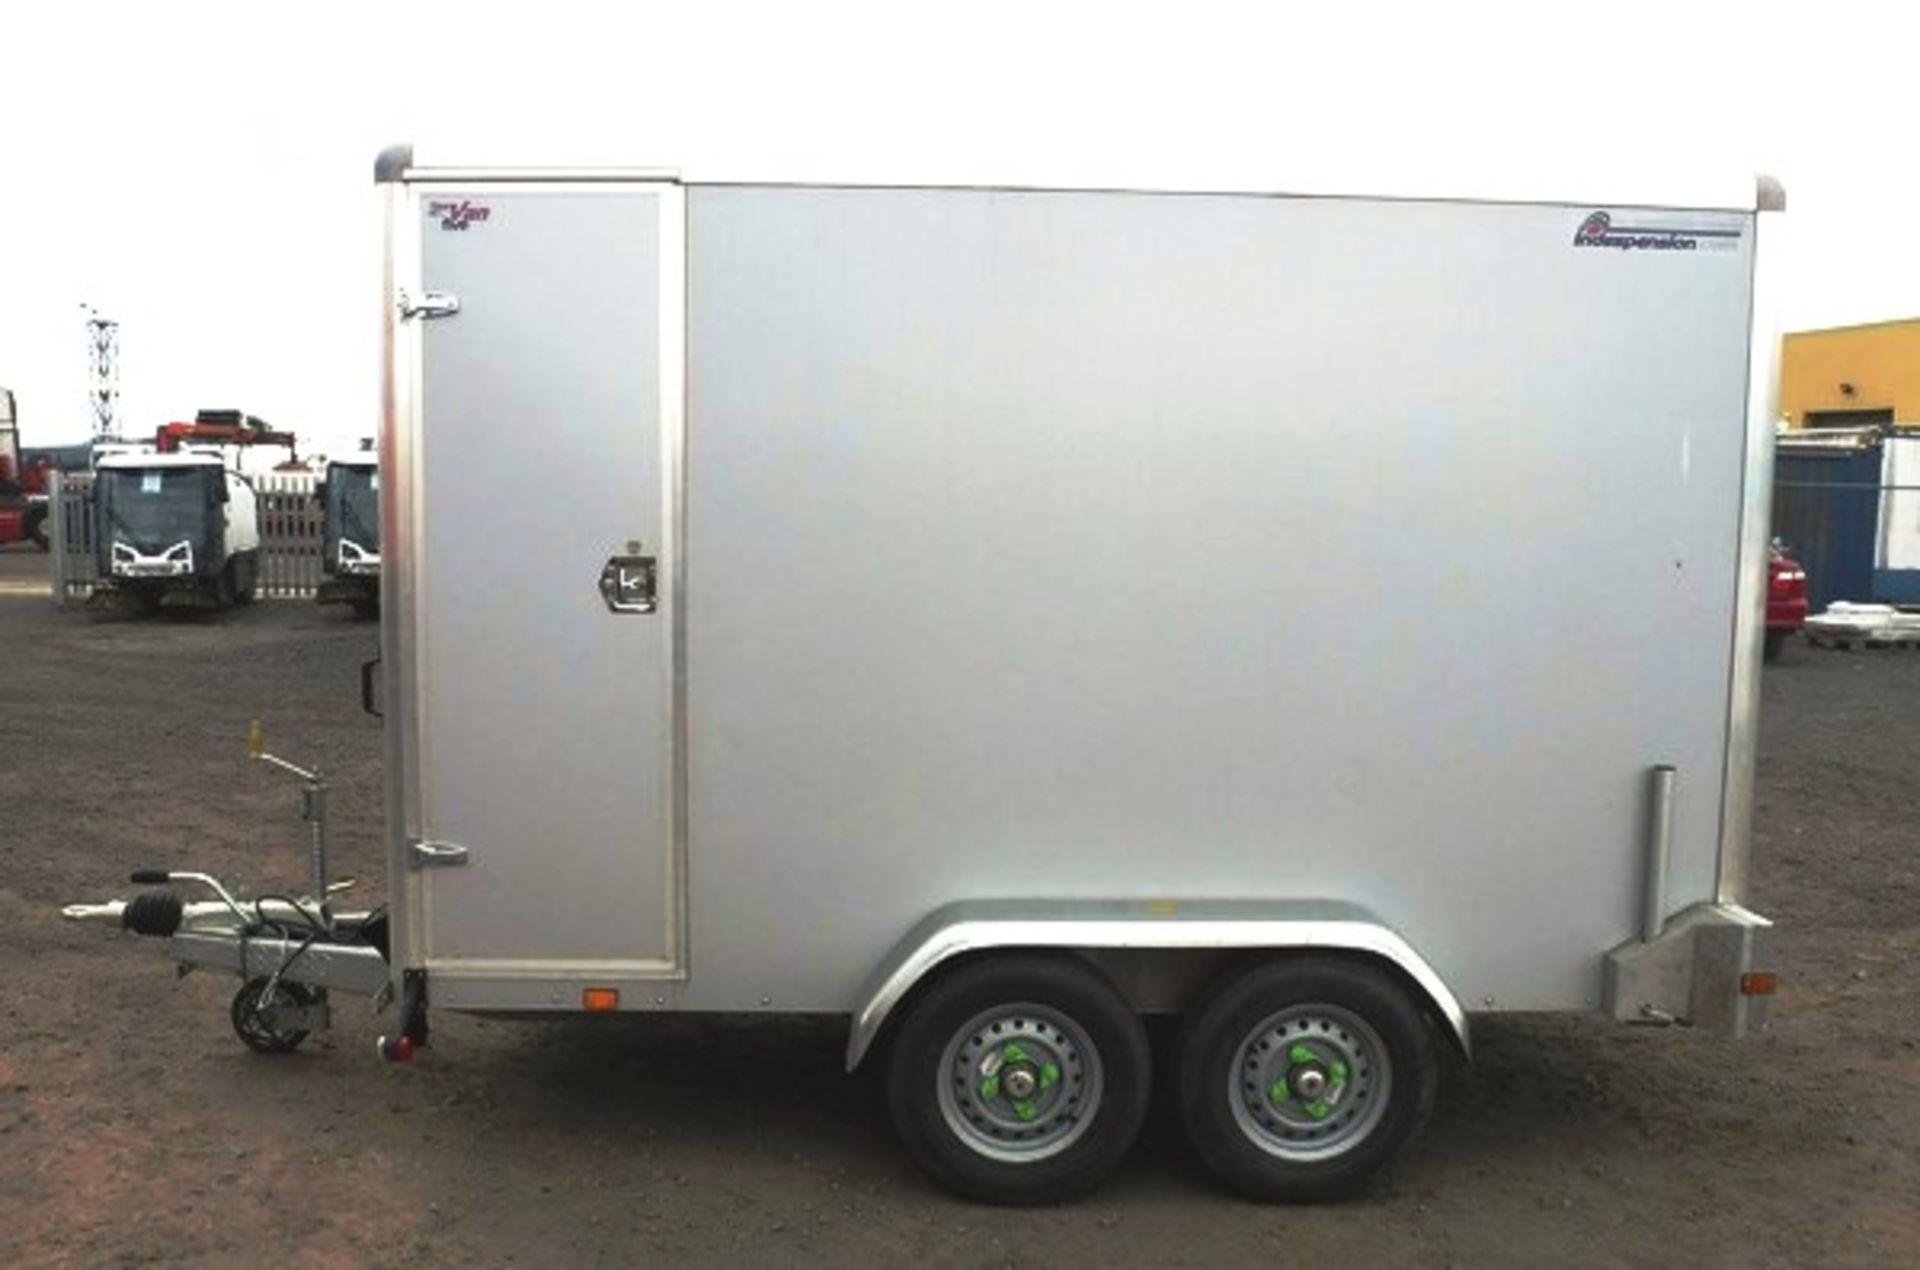 INDESPENSION BOX TRAILER WITH 2 OPENING BACK DOORS & 1 SIDE DOOR, 10FT X 5FT (APPROX) S/N213526 ASSE - Image 2 of 12